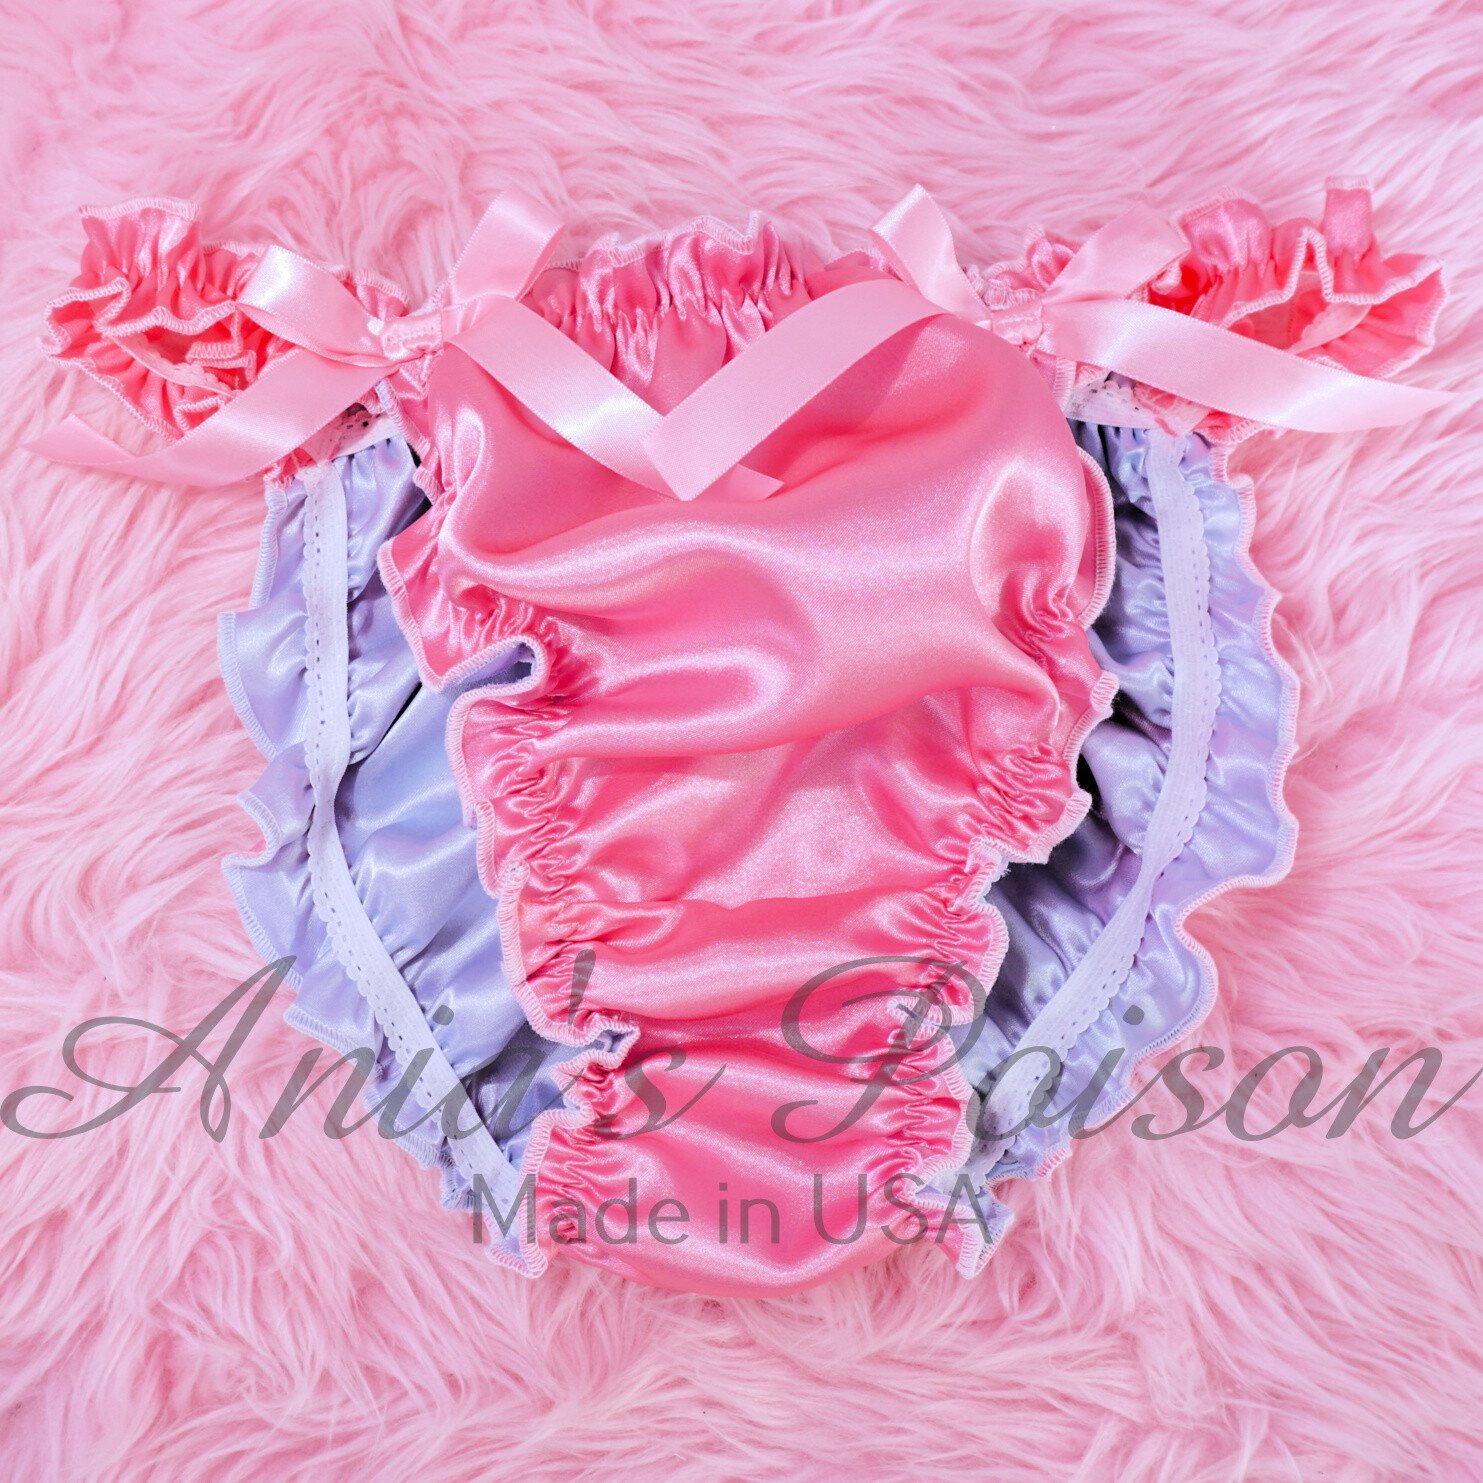 Best of Double lined satin panties